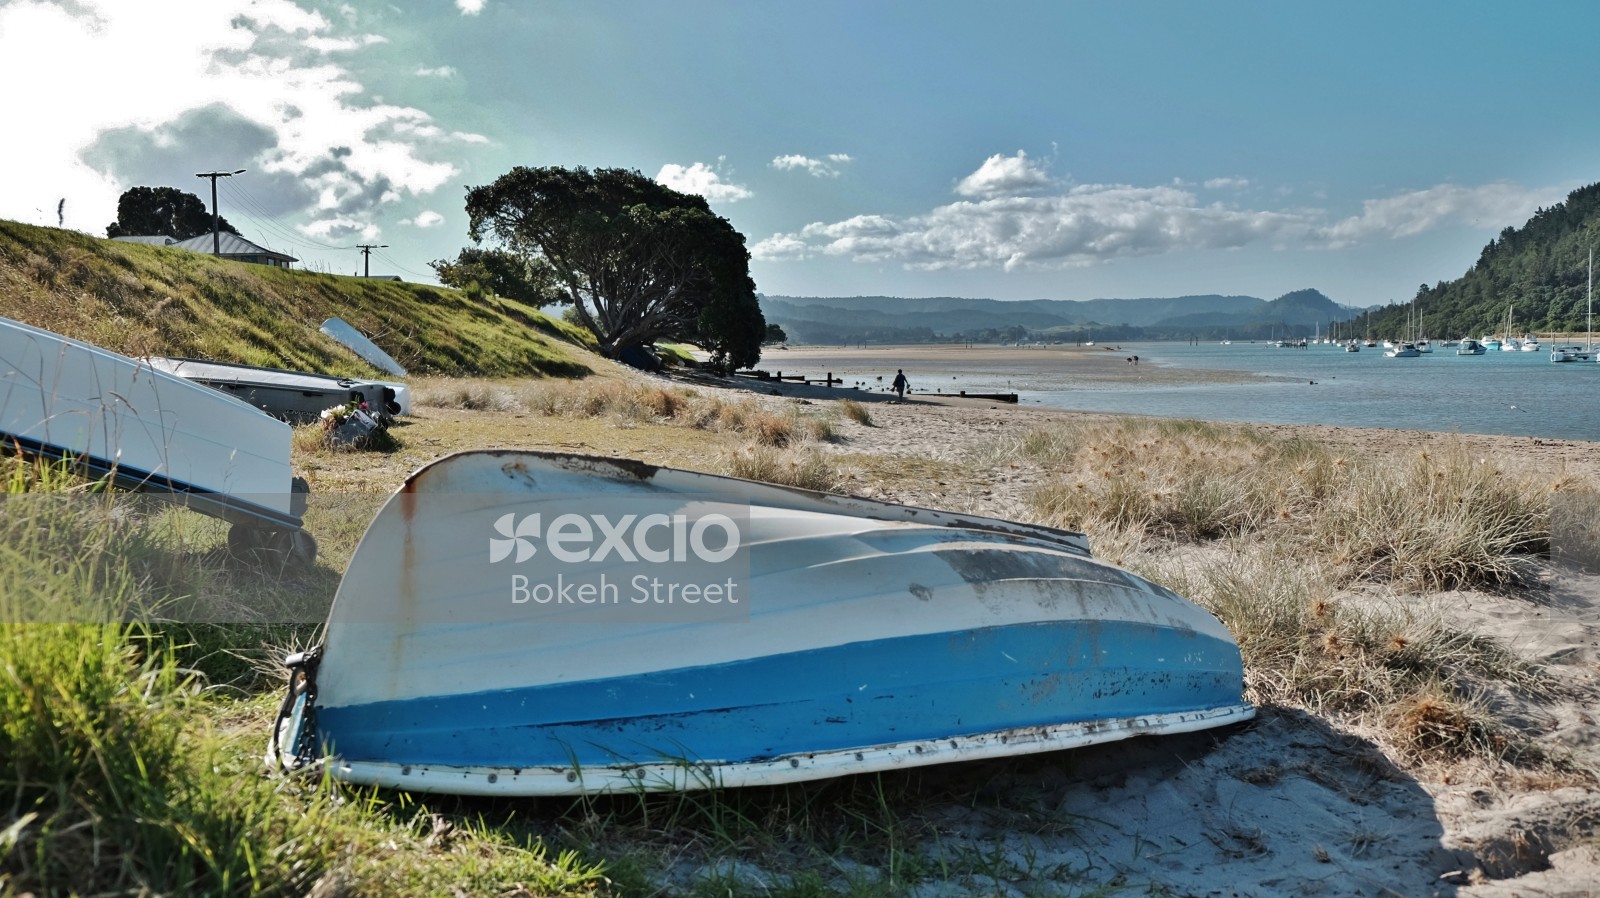 Overturned boats on a beach